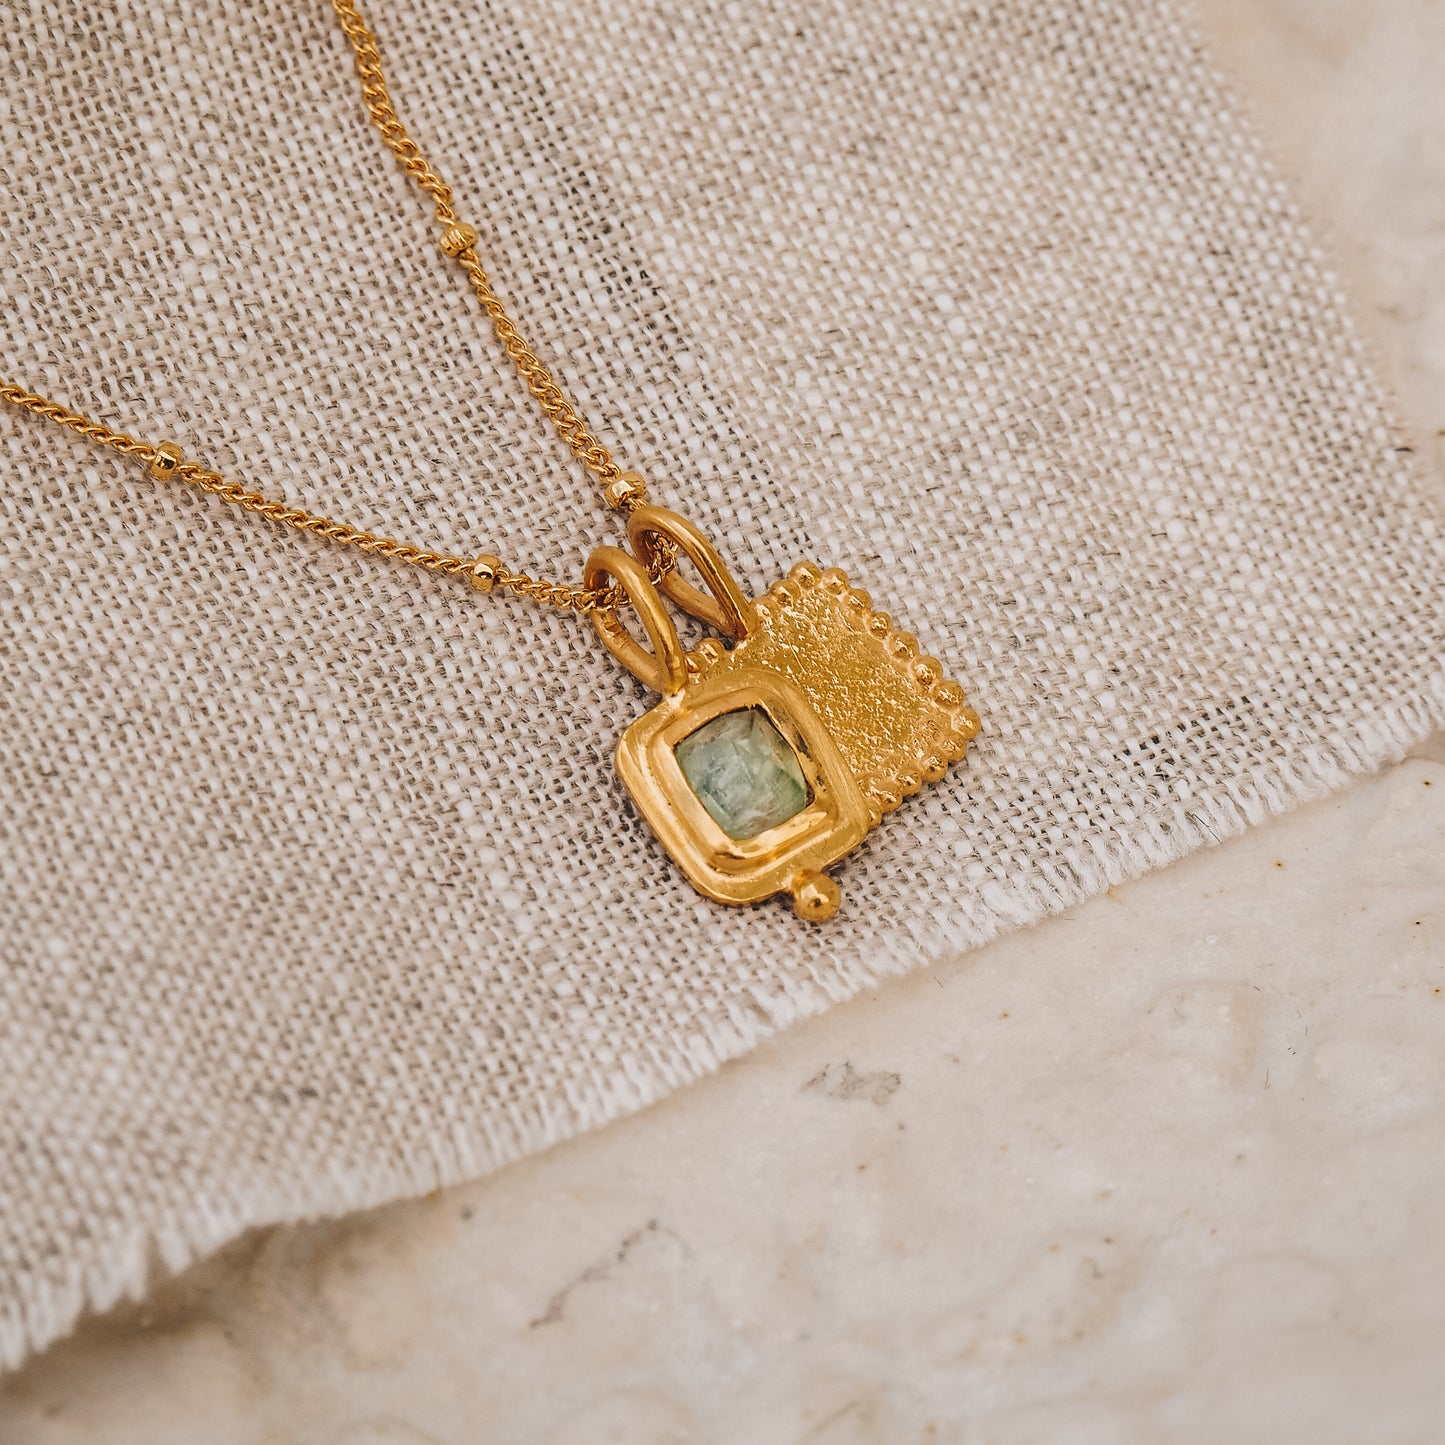 Two dainty, square, gold pendants, one with a rose cut blue tourmaline, suspended from a fine chain 